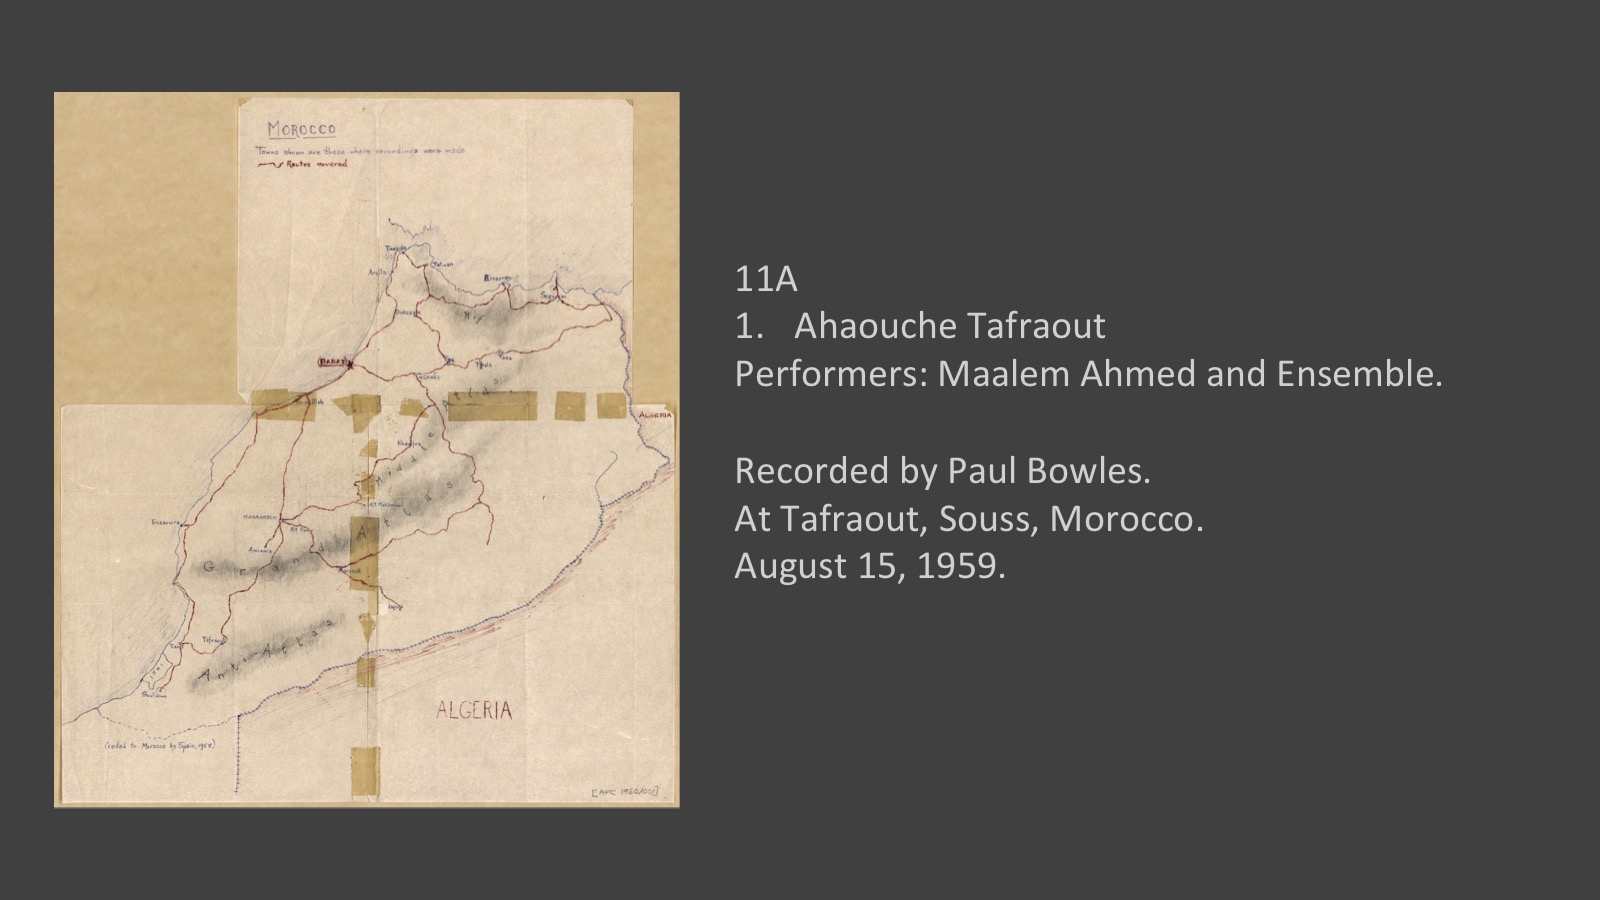 11A
1. Ahaouche Tafraout
Performers: Maalem Ahmed and Ensemble.

Recorded by Paul Bowles.
At Tafraout, Souss, Morocco, August 15, 1959.